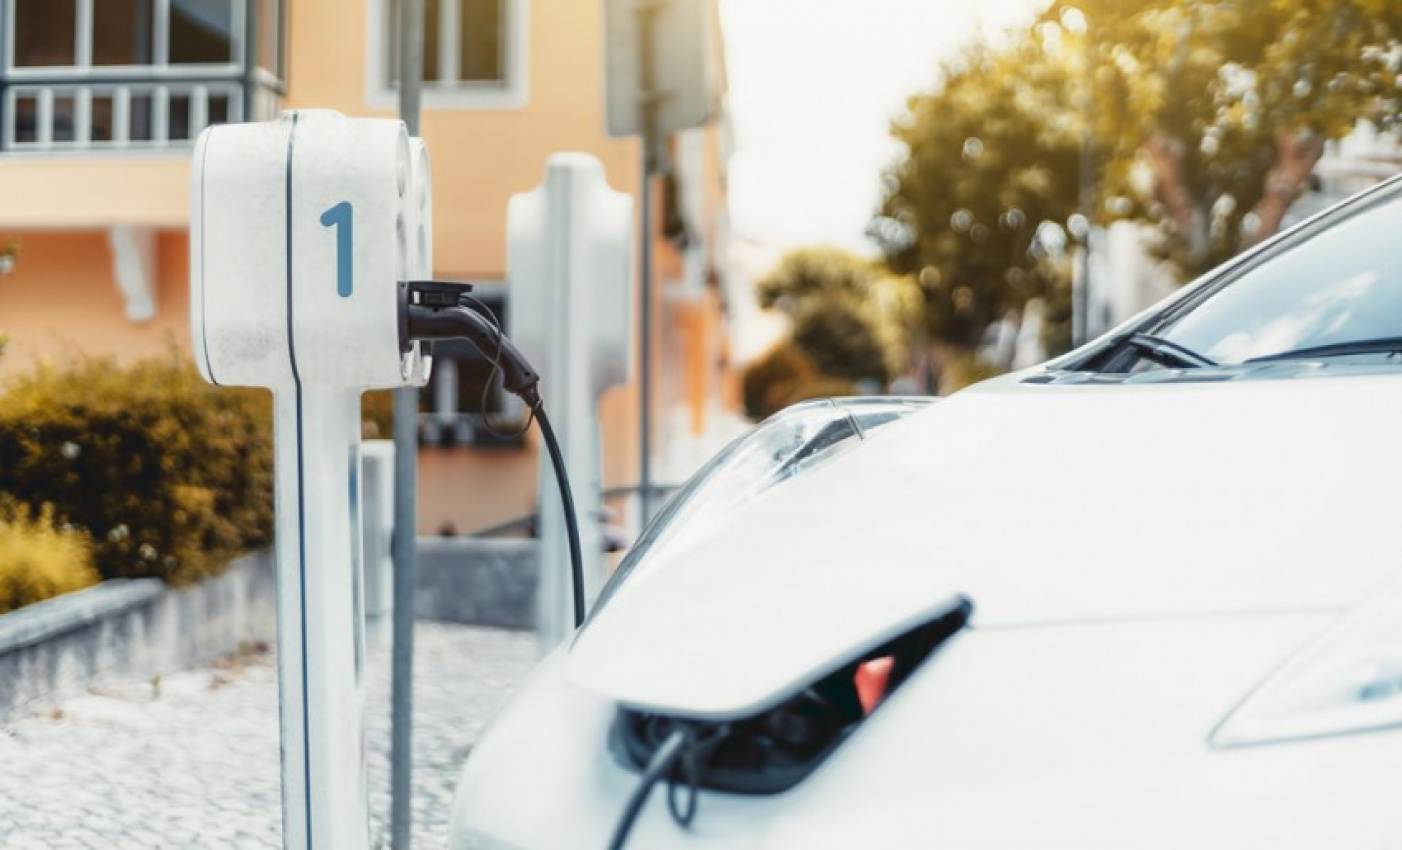 autos, cars, reviews, battery, cobalt, electric cars, environment, ev, insights, lithium-ion, recycling, volkswagen, an ev boom, a battery crisis, and the deadly cost of ‘progress’